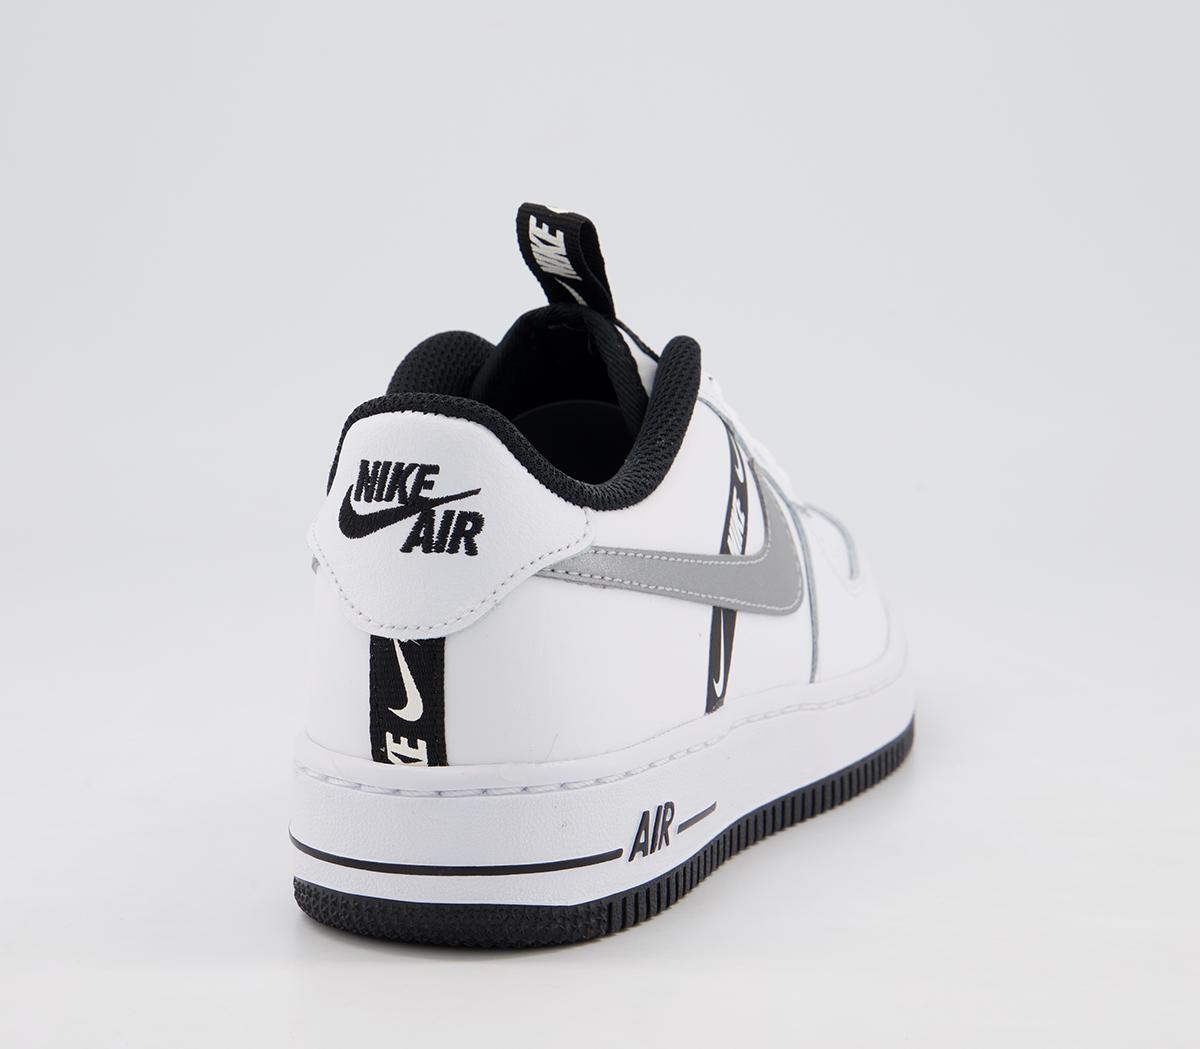 Nike Af1 Boys White Black Silver - Hers trainers